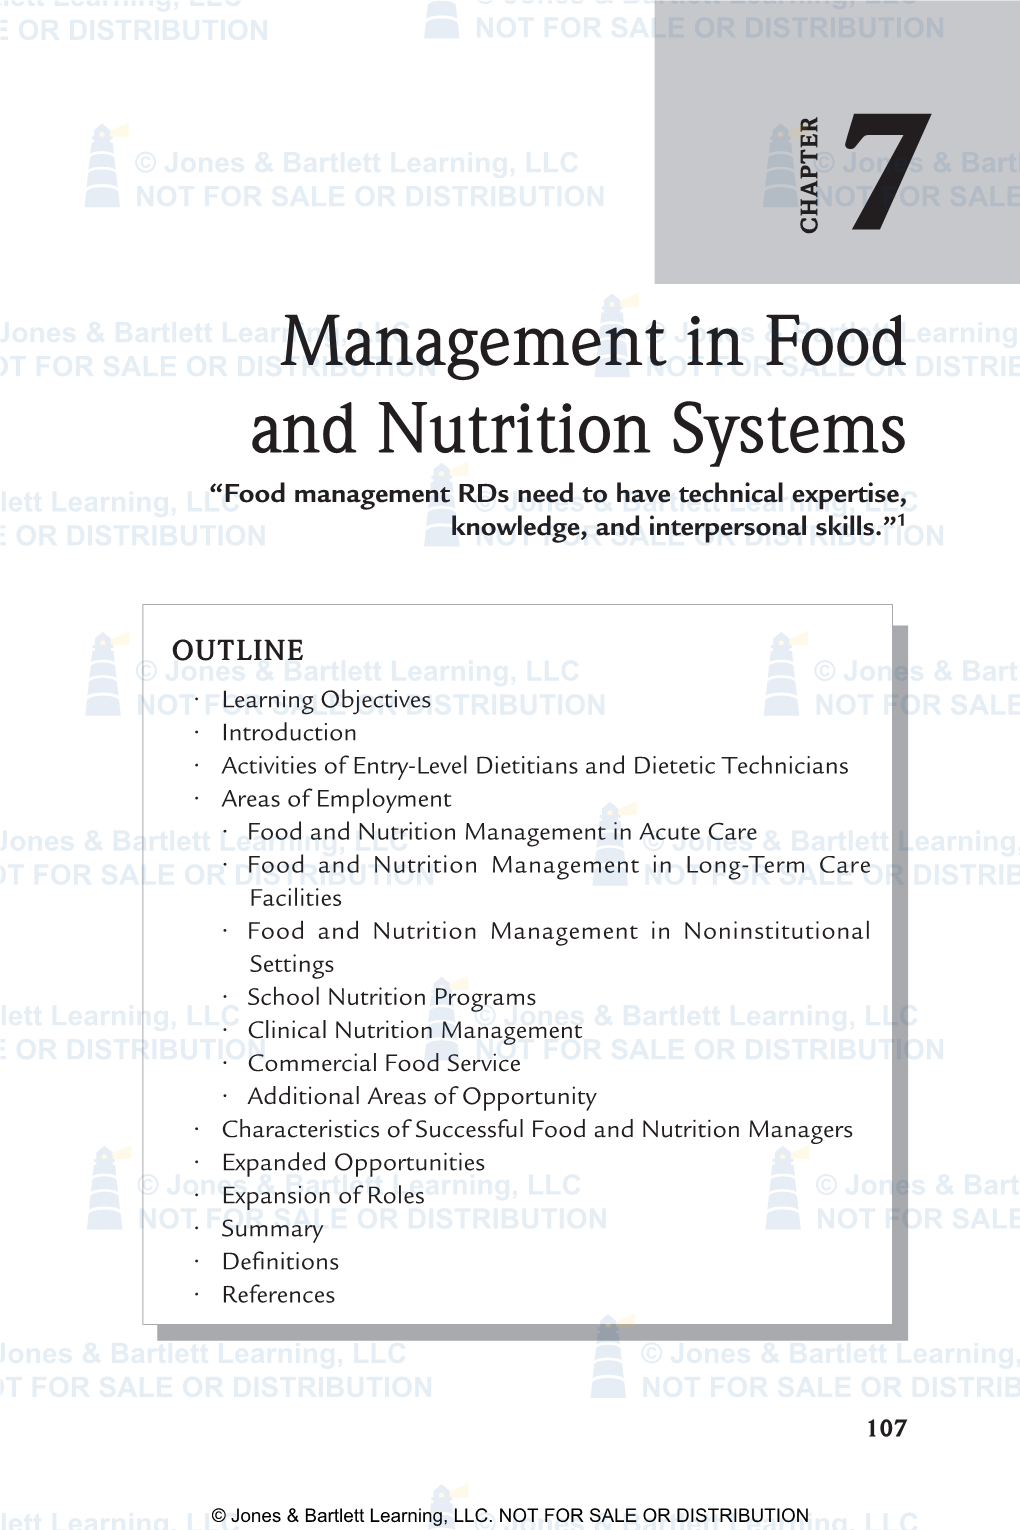 Management in Food and Nutrition Systems